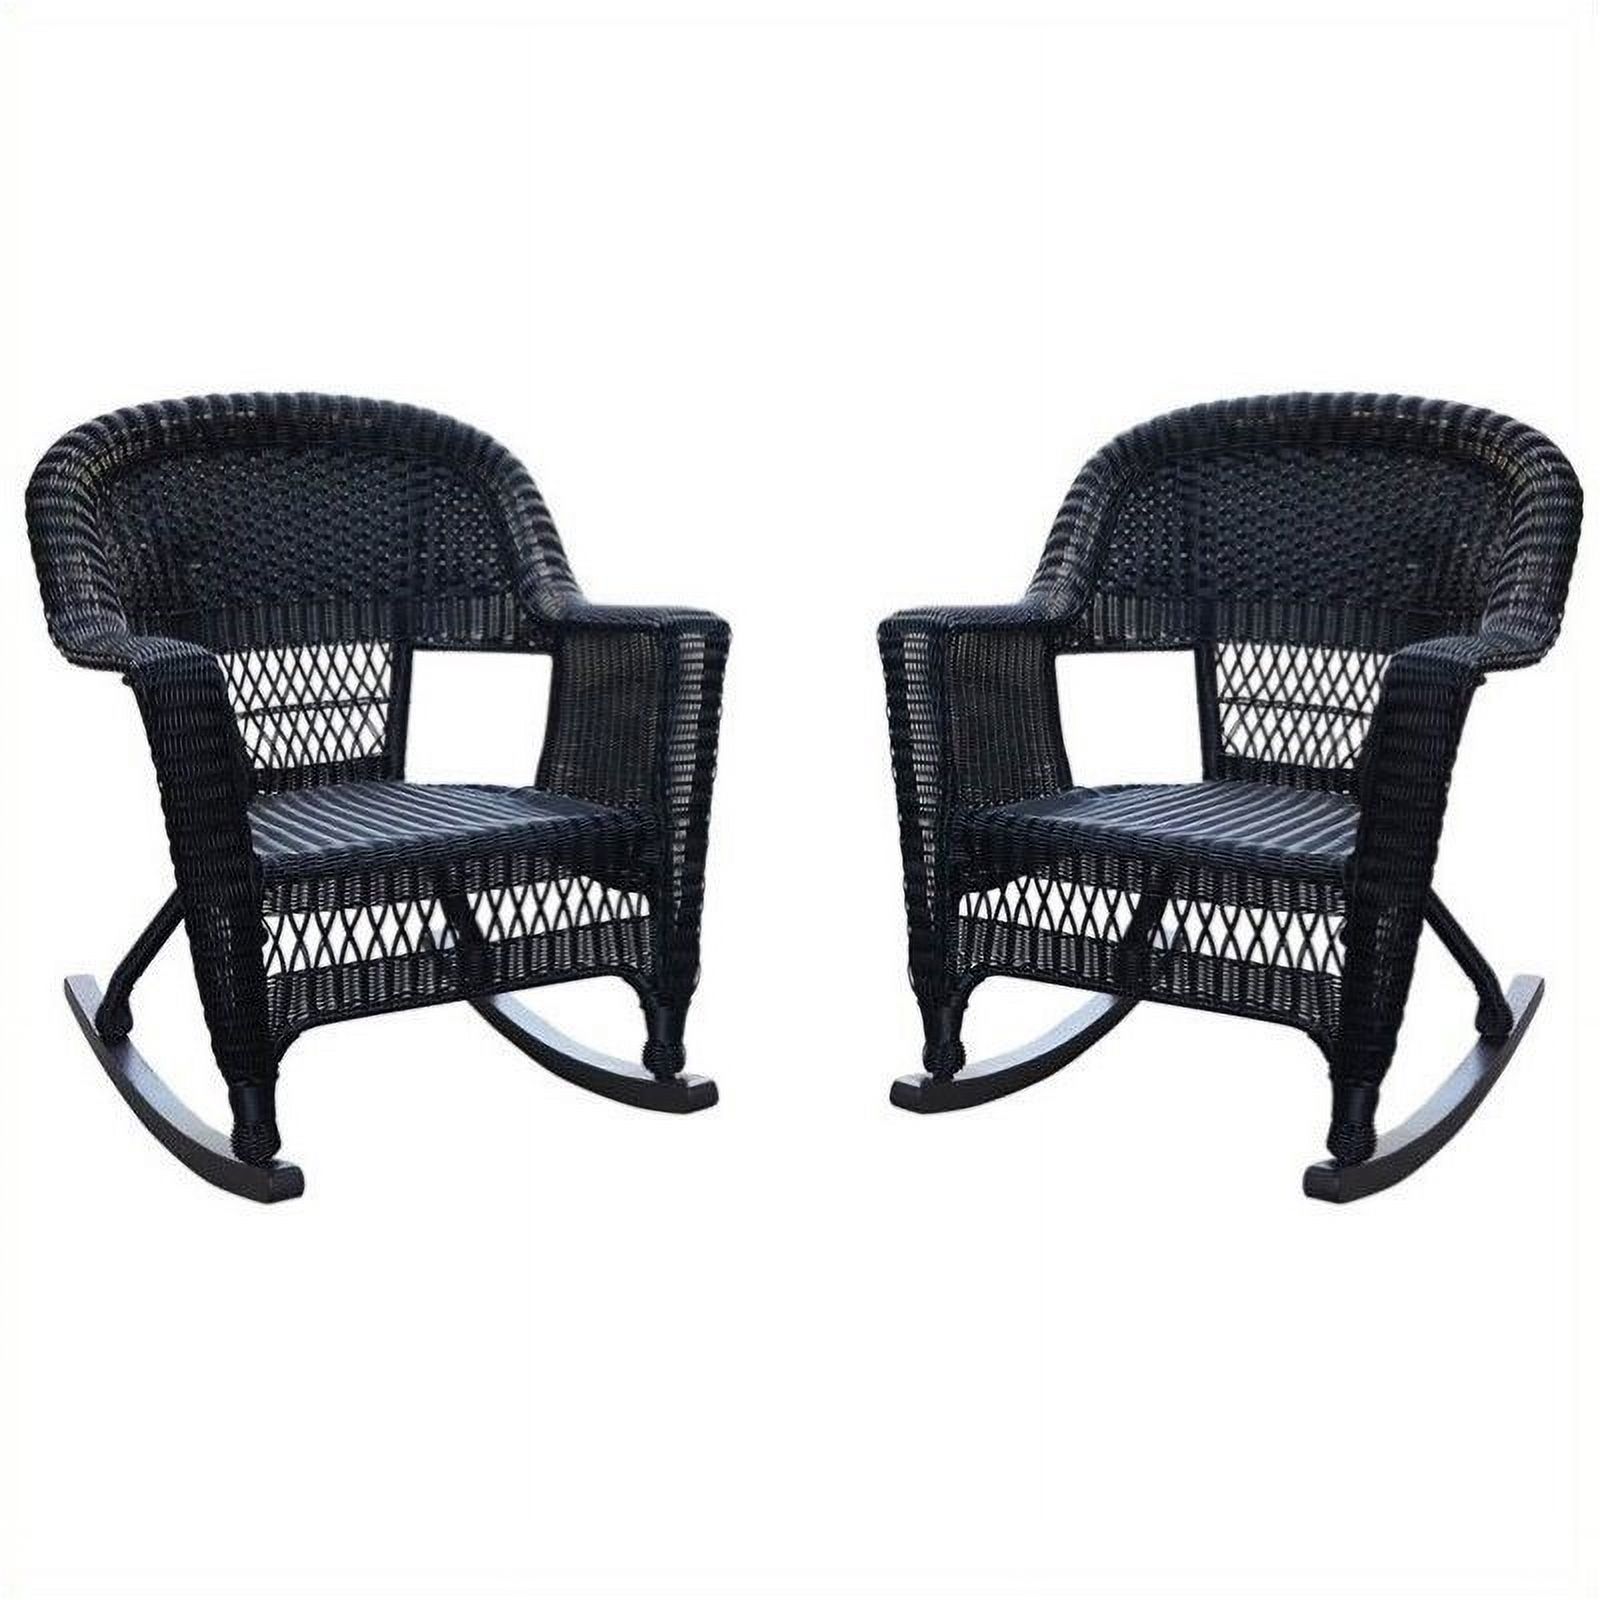 3 Piece Patio Furniture Set with (Set of 2) Patio Rocker and Water Fountain - image 5 of 5